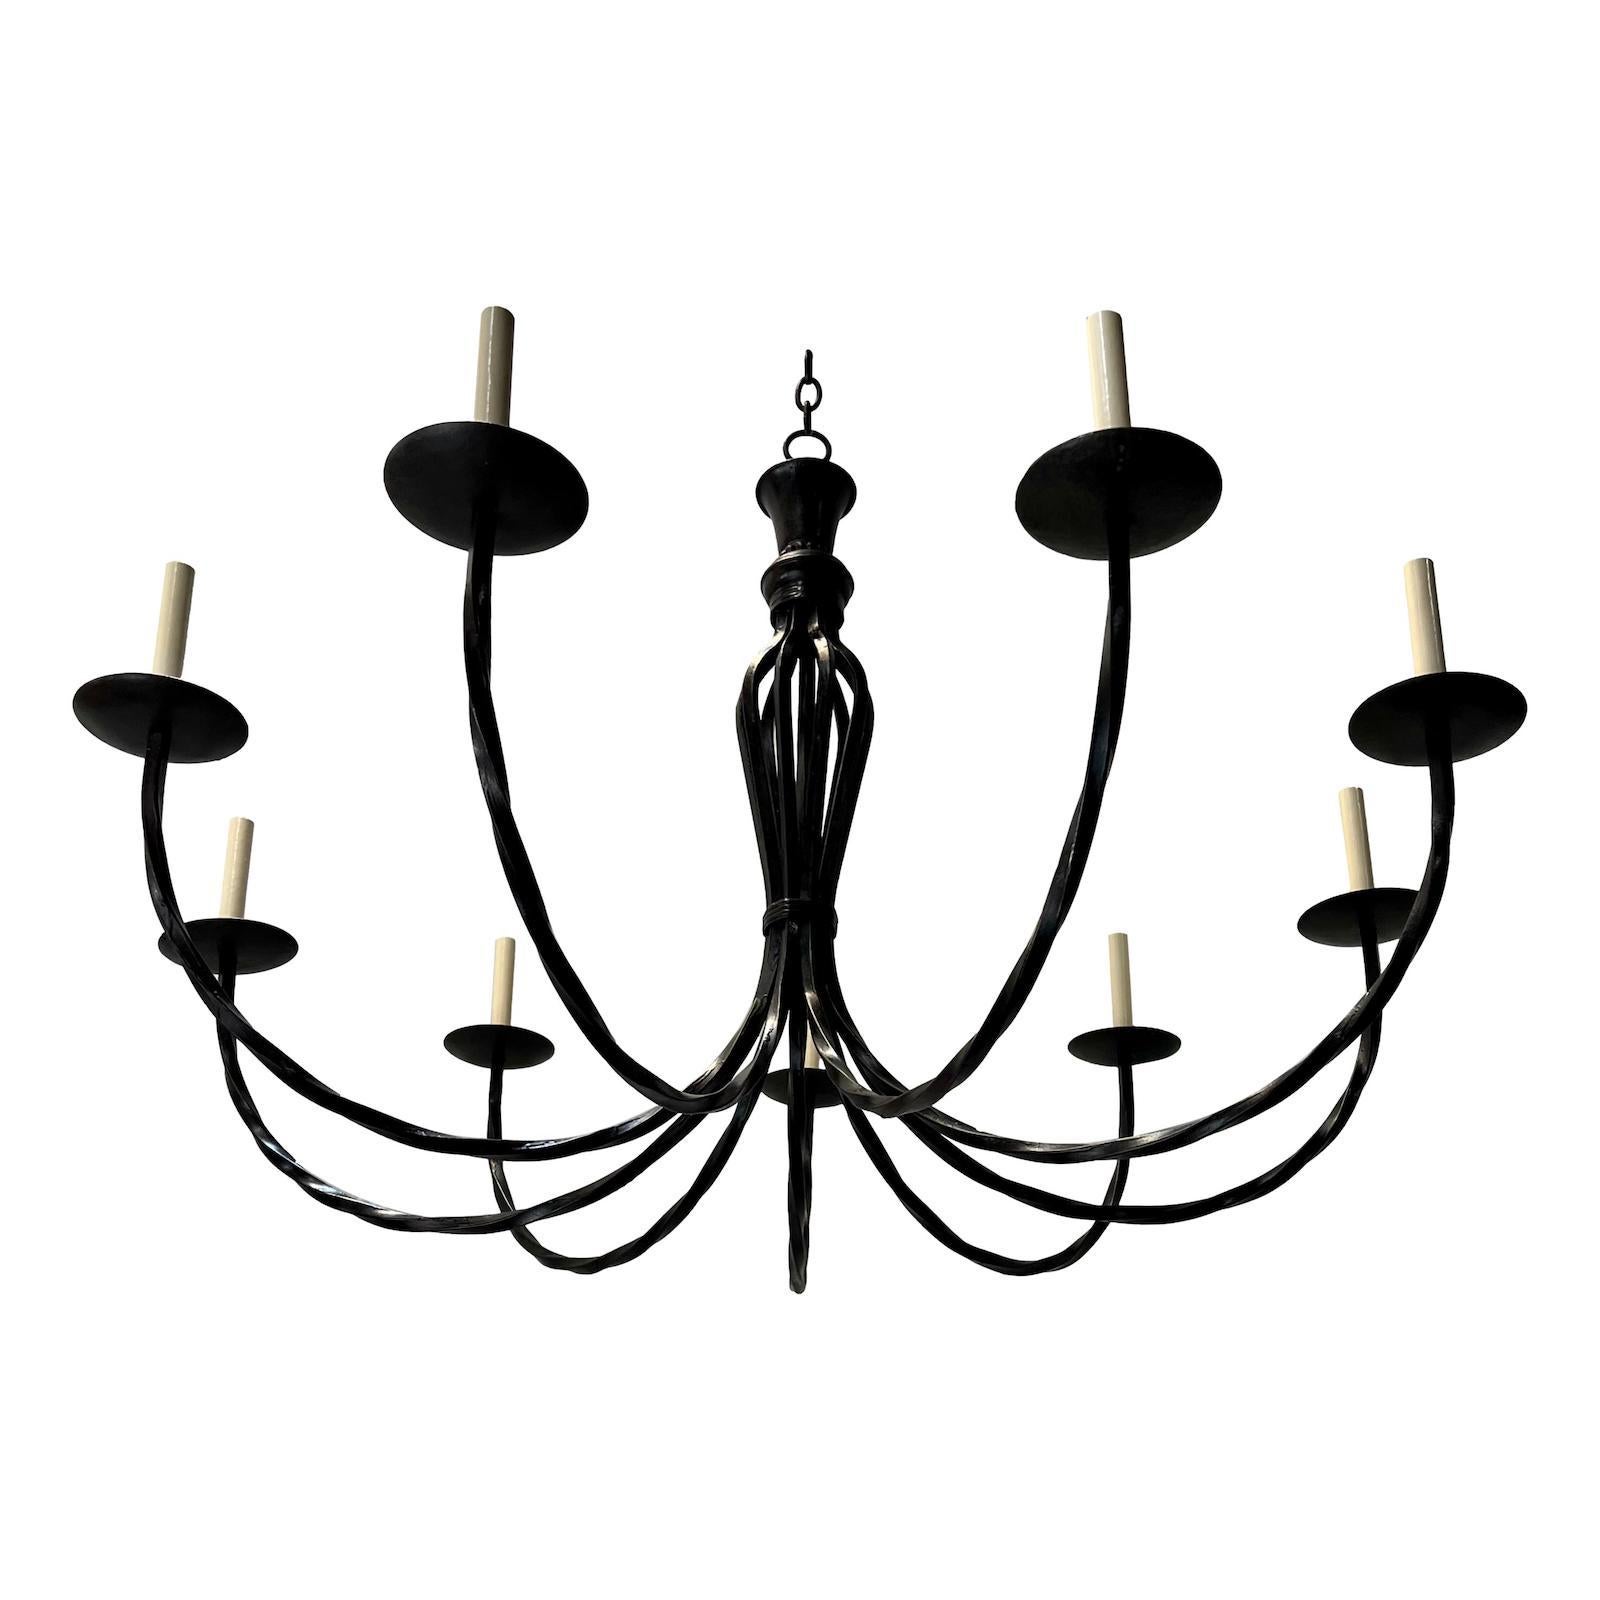 An Italian nine-arm wrought iron chandeliers. Sold individually.

Measurements:
Drop: 36